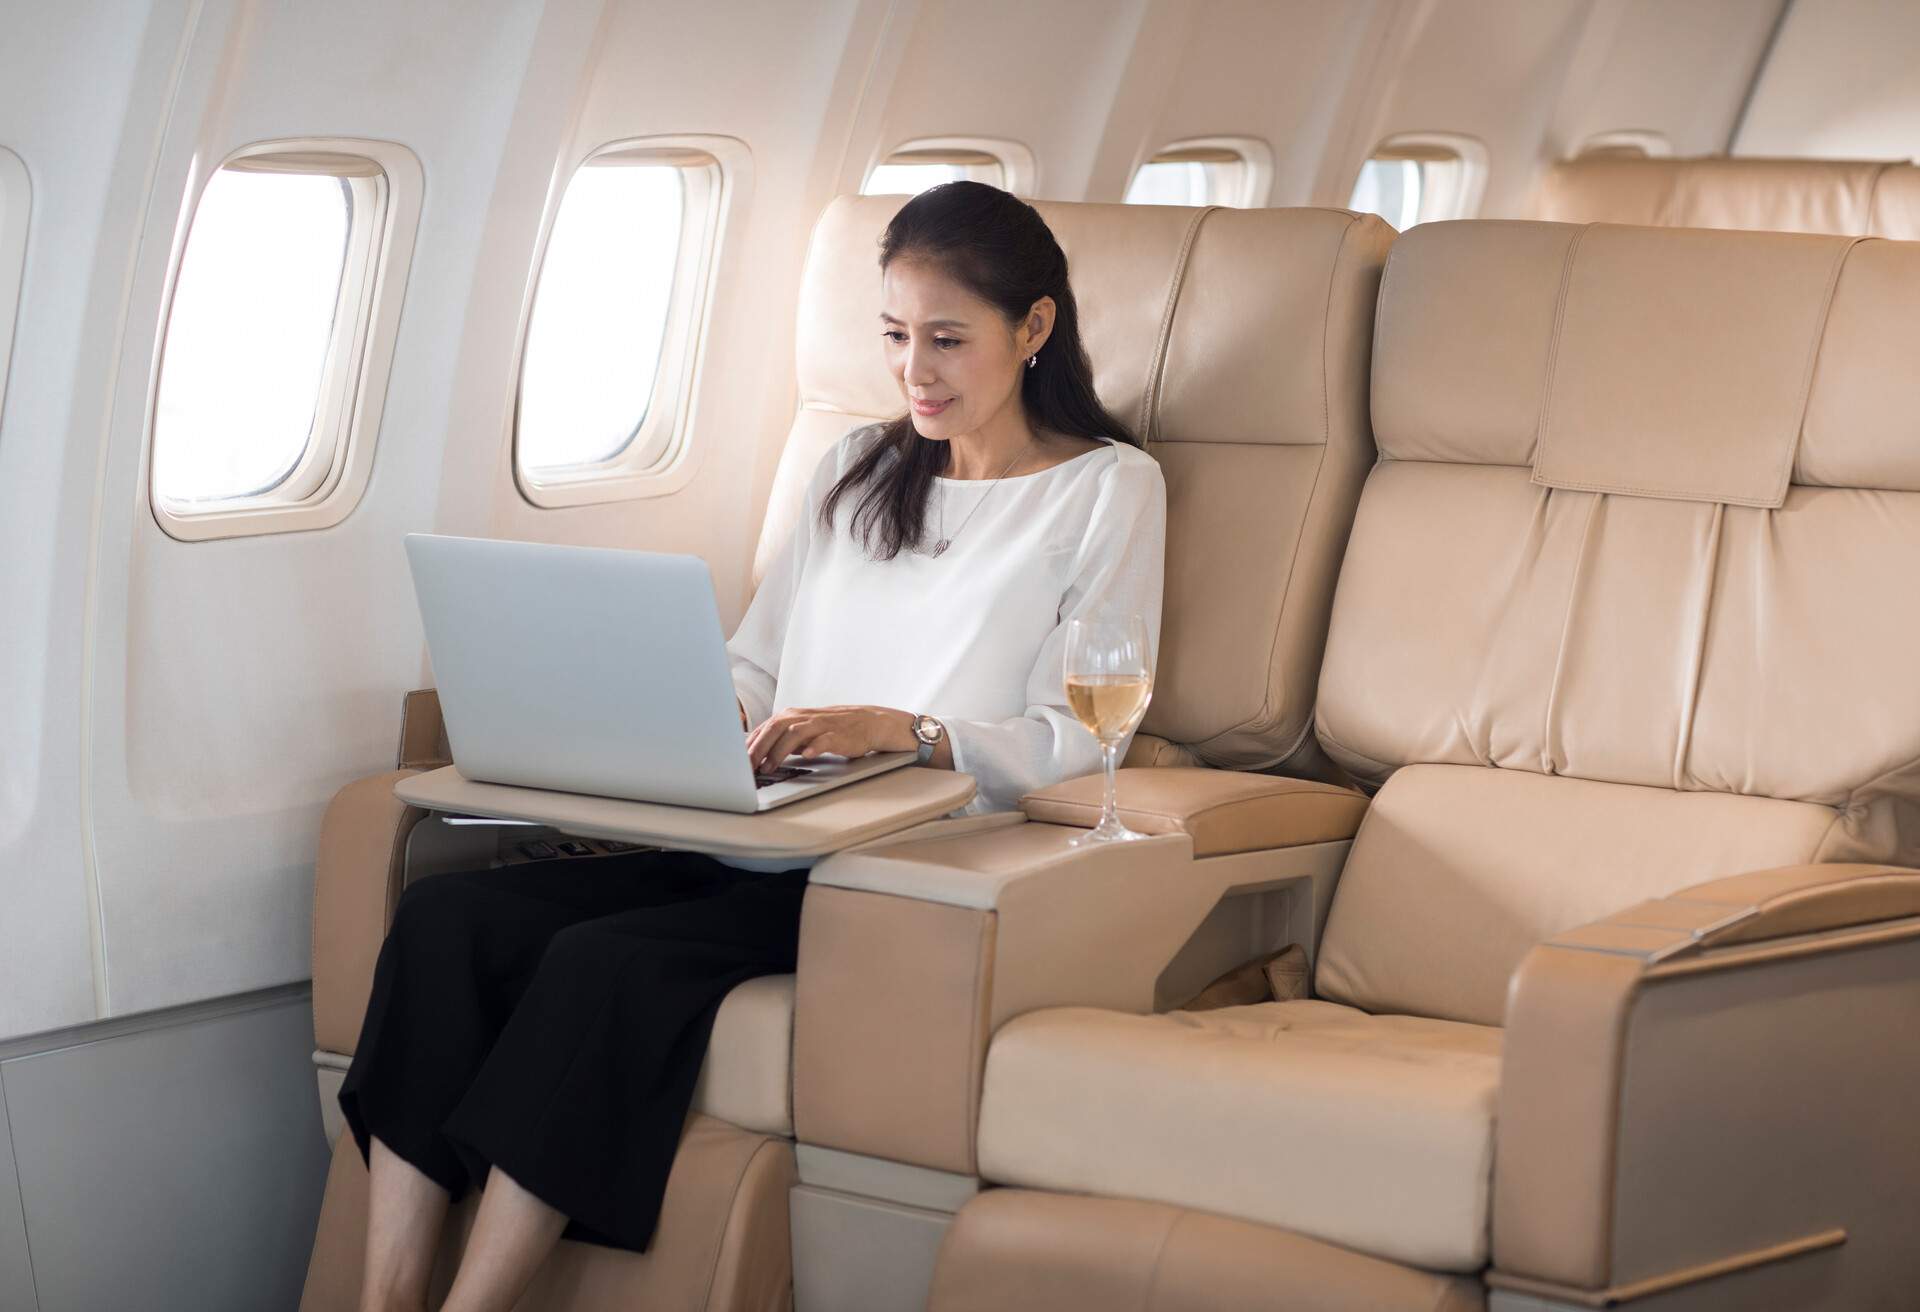 A woman working on her laptop during her flight seated on the plane's window seat.